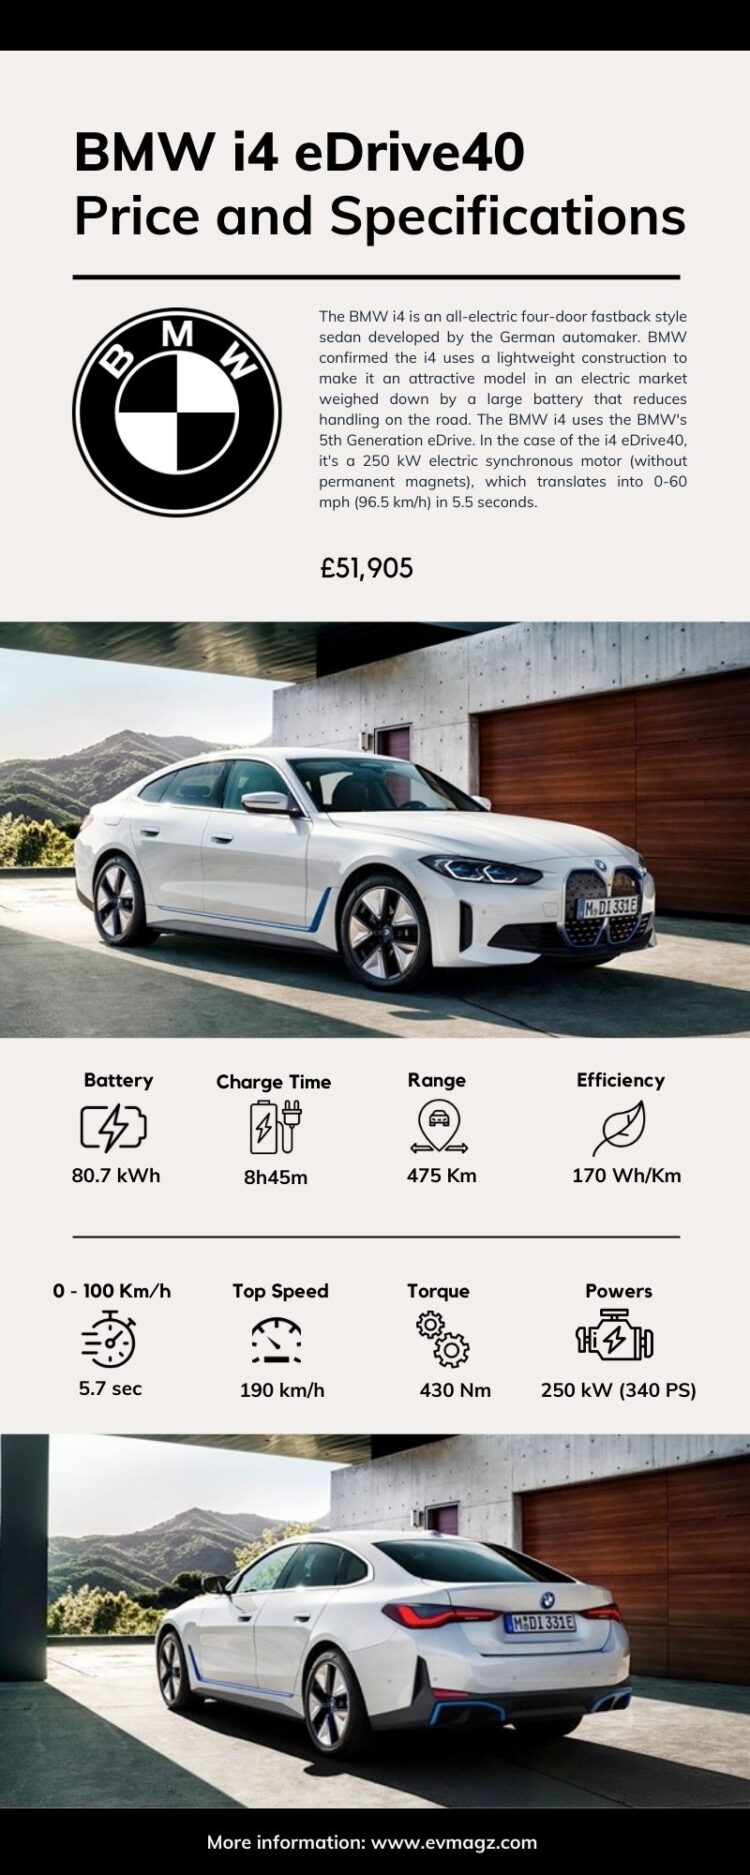 BMW i4 eDrive40 Price and Specifications Infographic